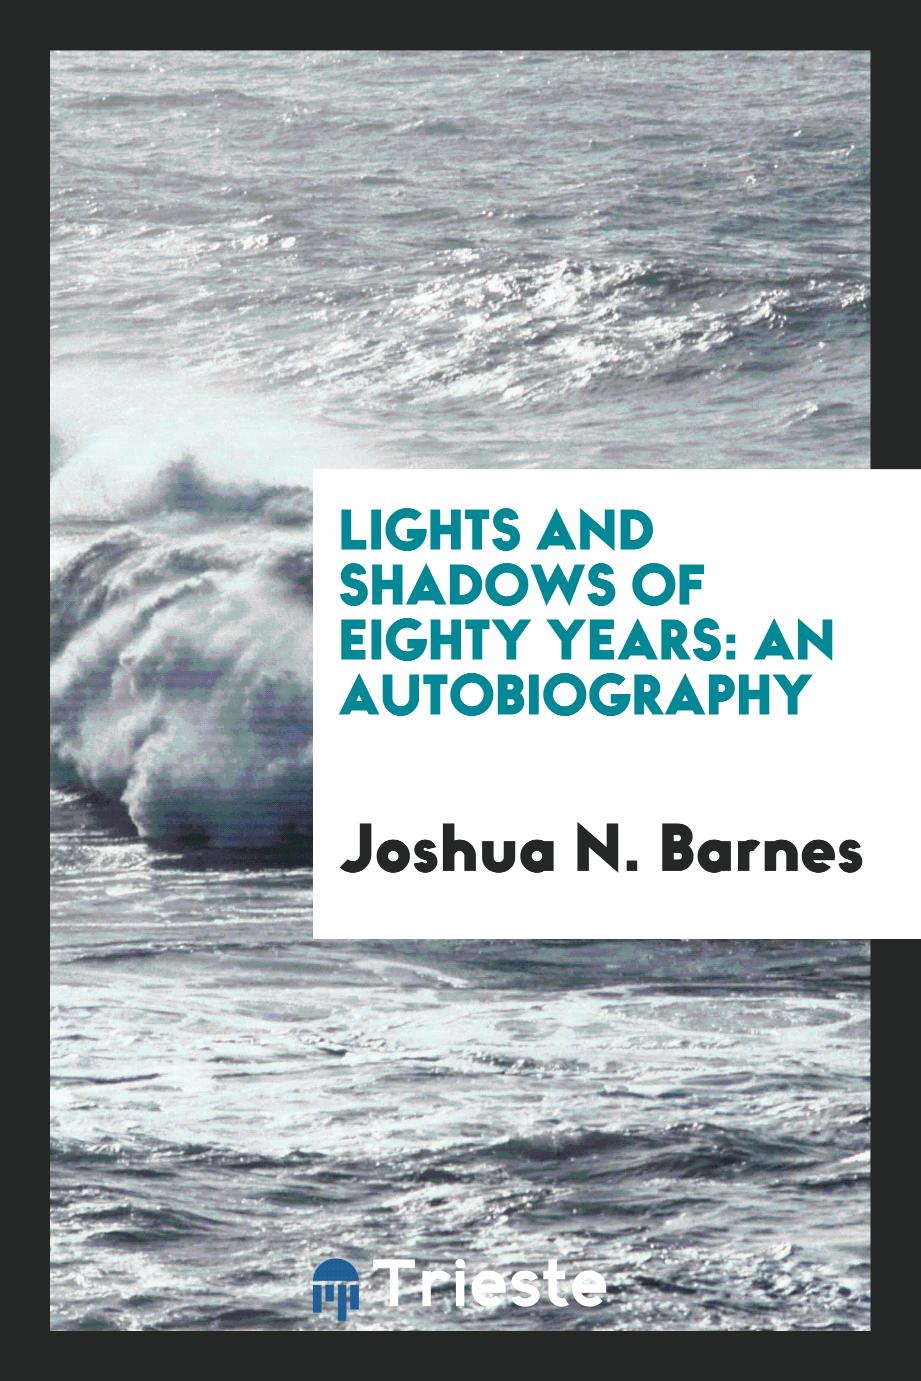 Lights and shadows of eighty years: an autobiography